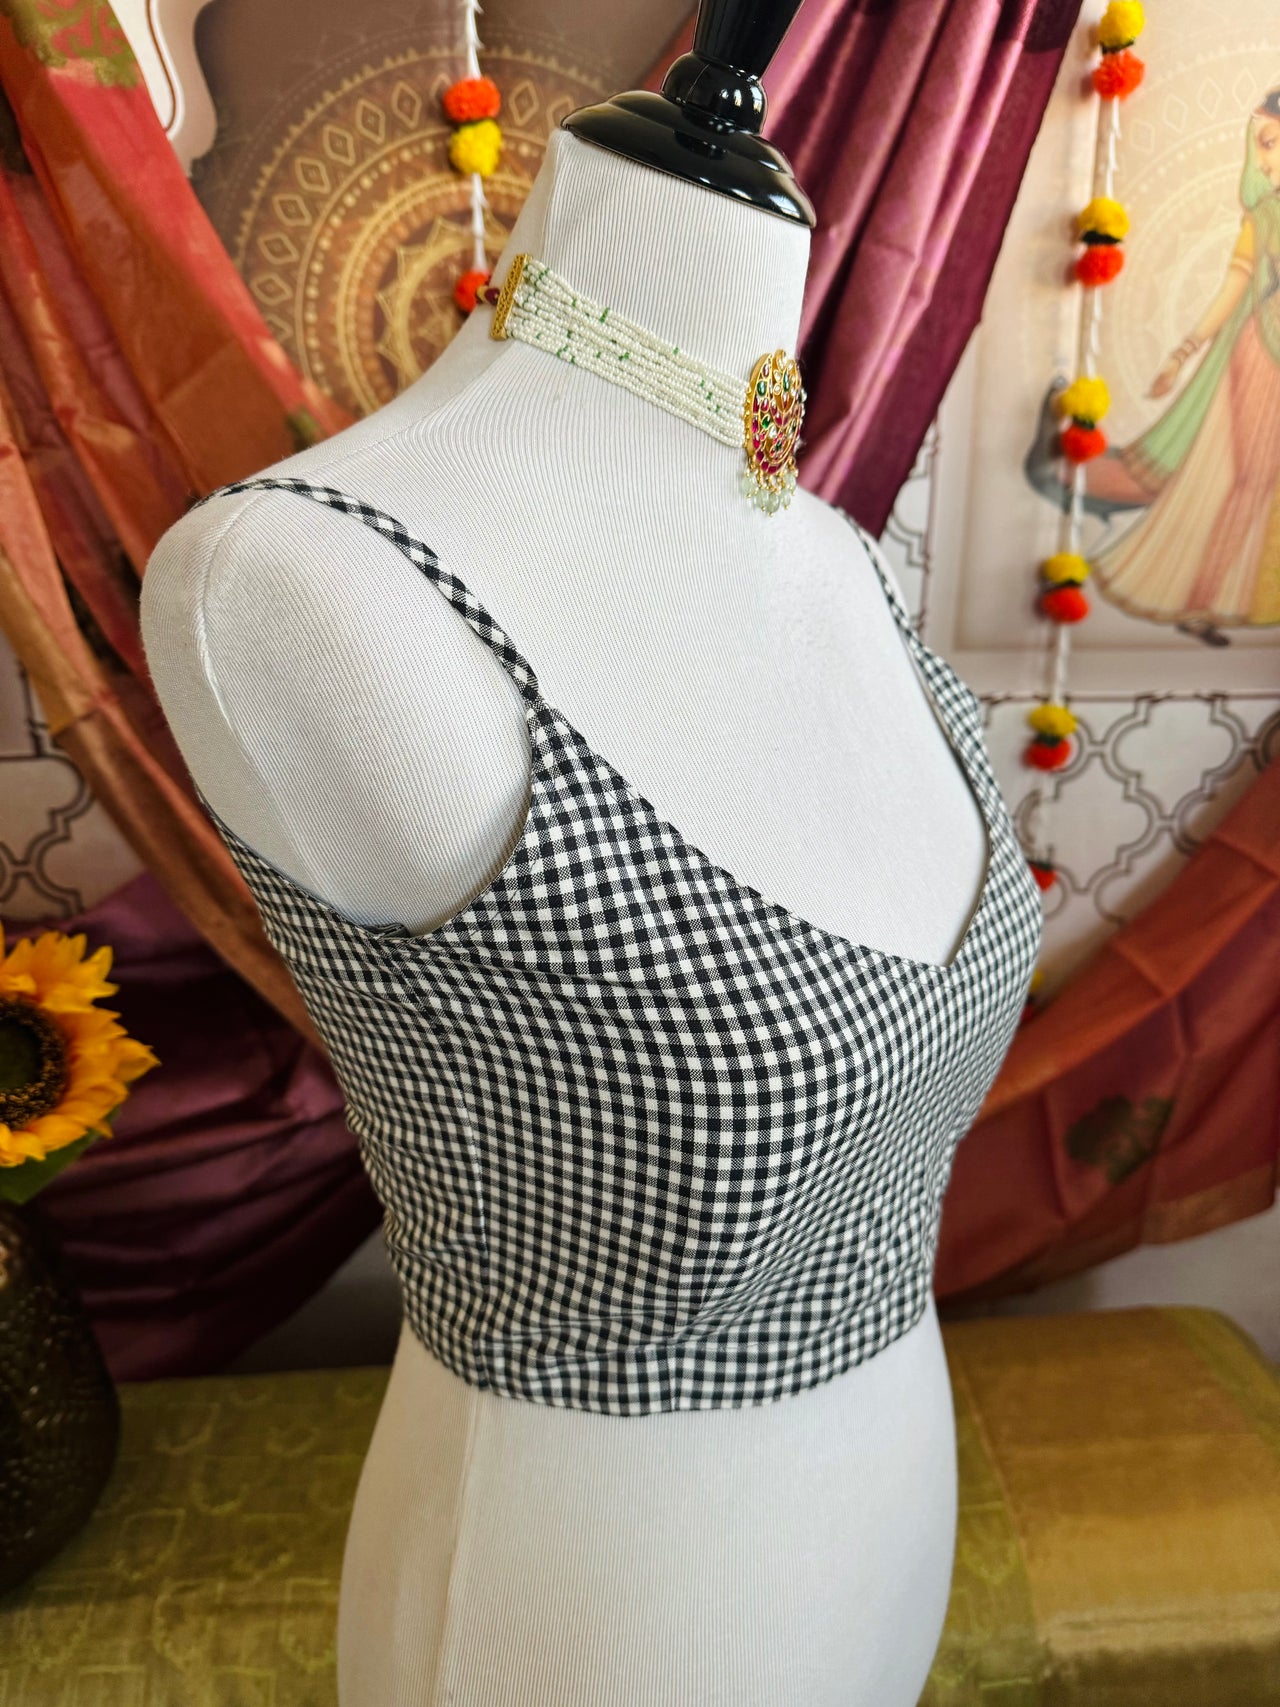 Ready To Wear Saree Blouse | Handwoven Cotton | Size 34 | Black and White Checks | Sphagetti Strap | Free Shipping | Ships from California